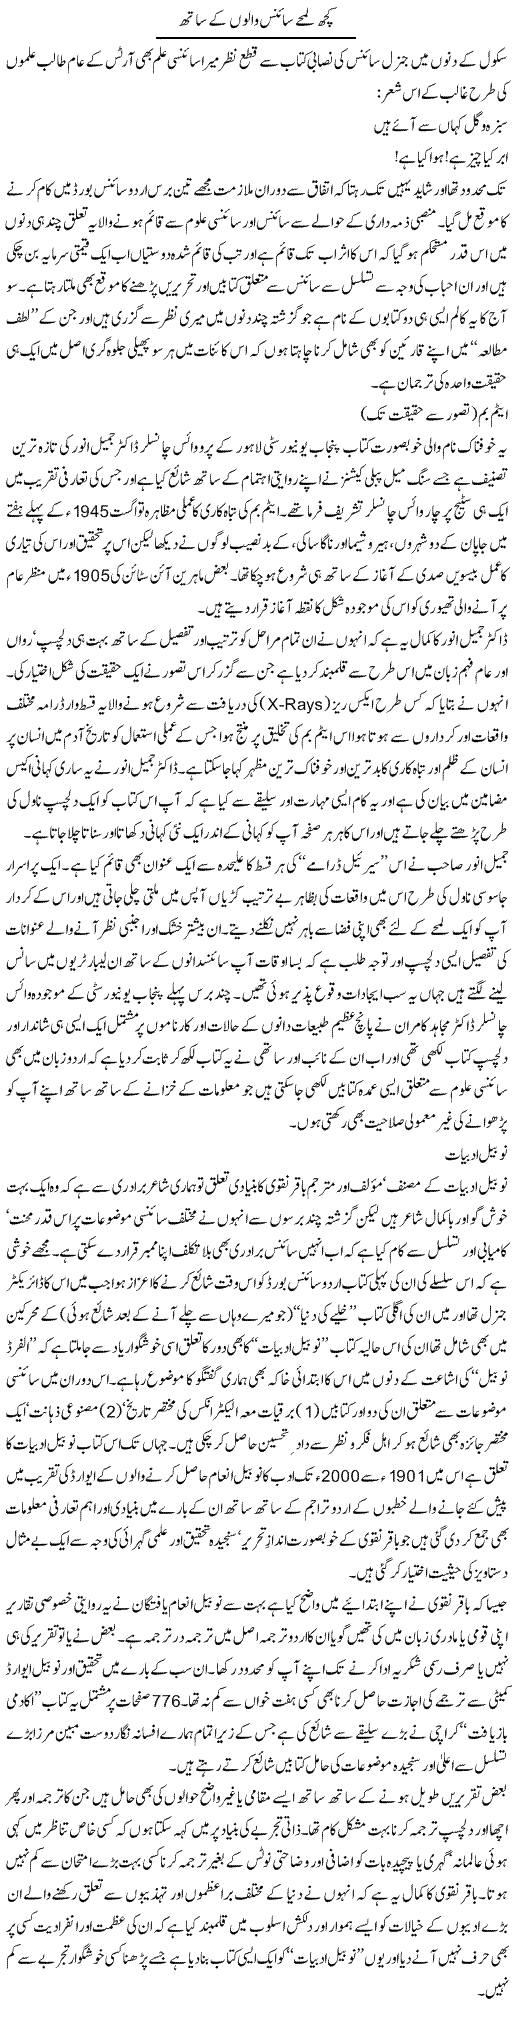 Some For Scientist Express Column Amjad Islam 31 October 2010